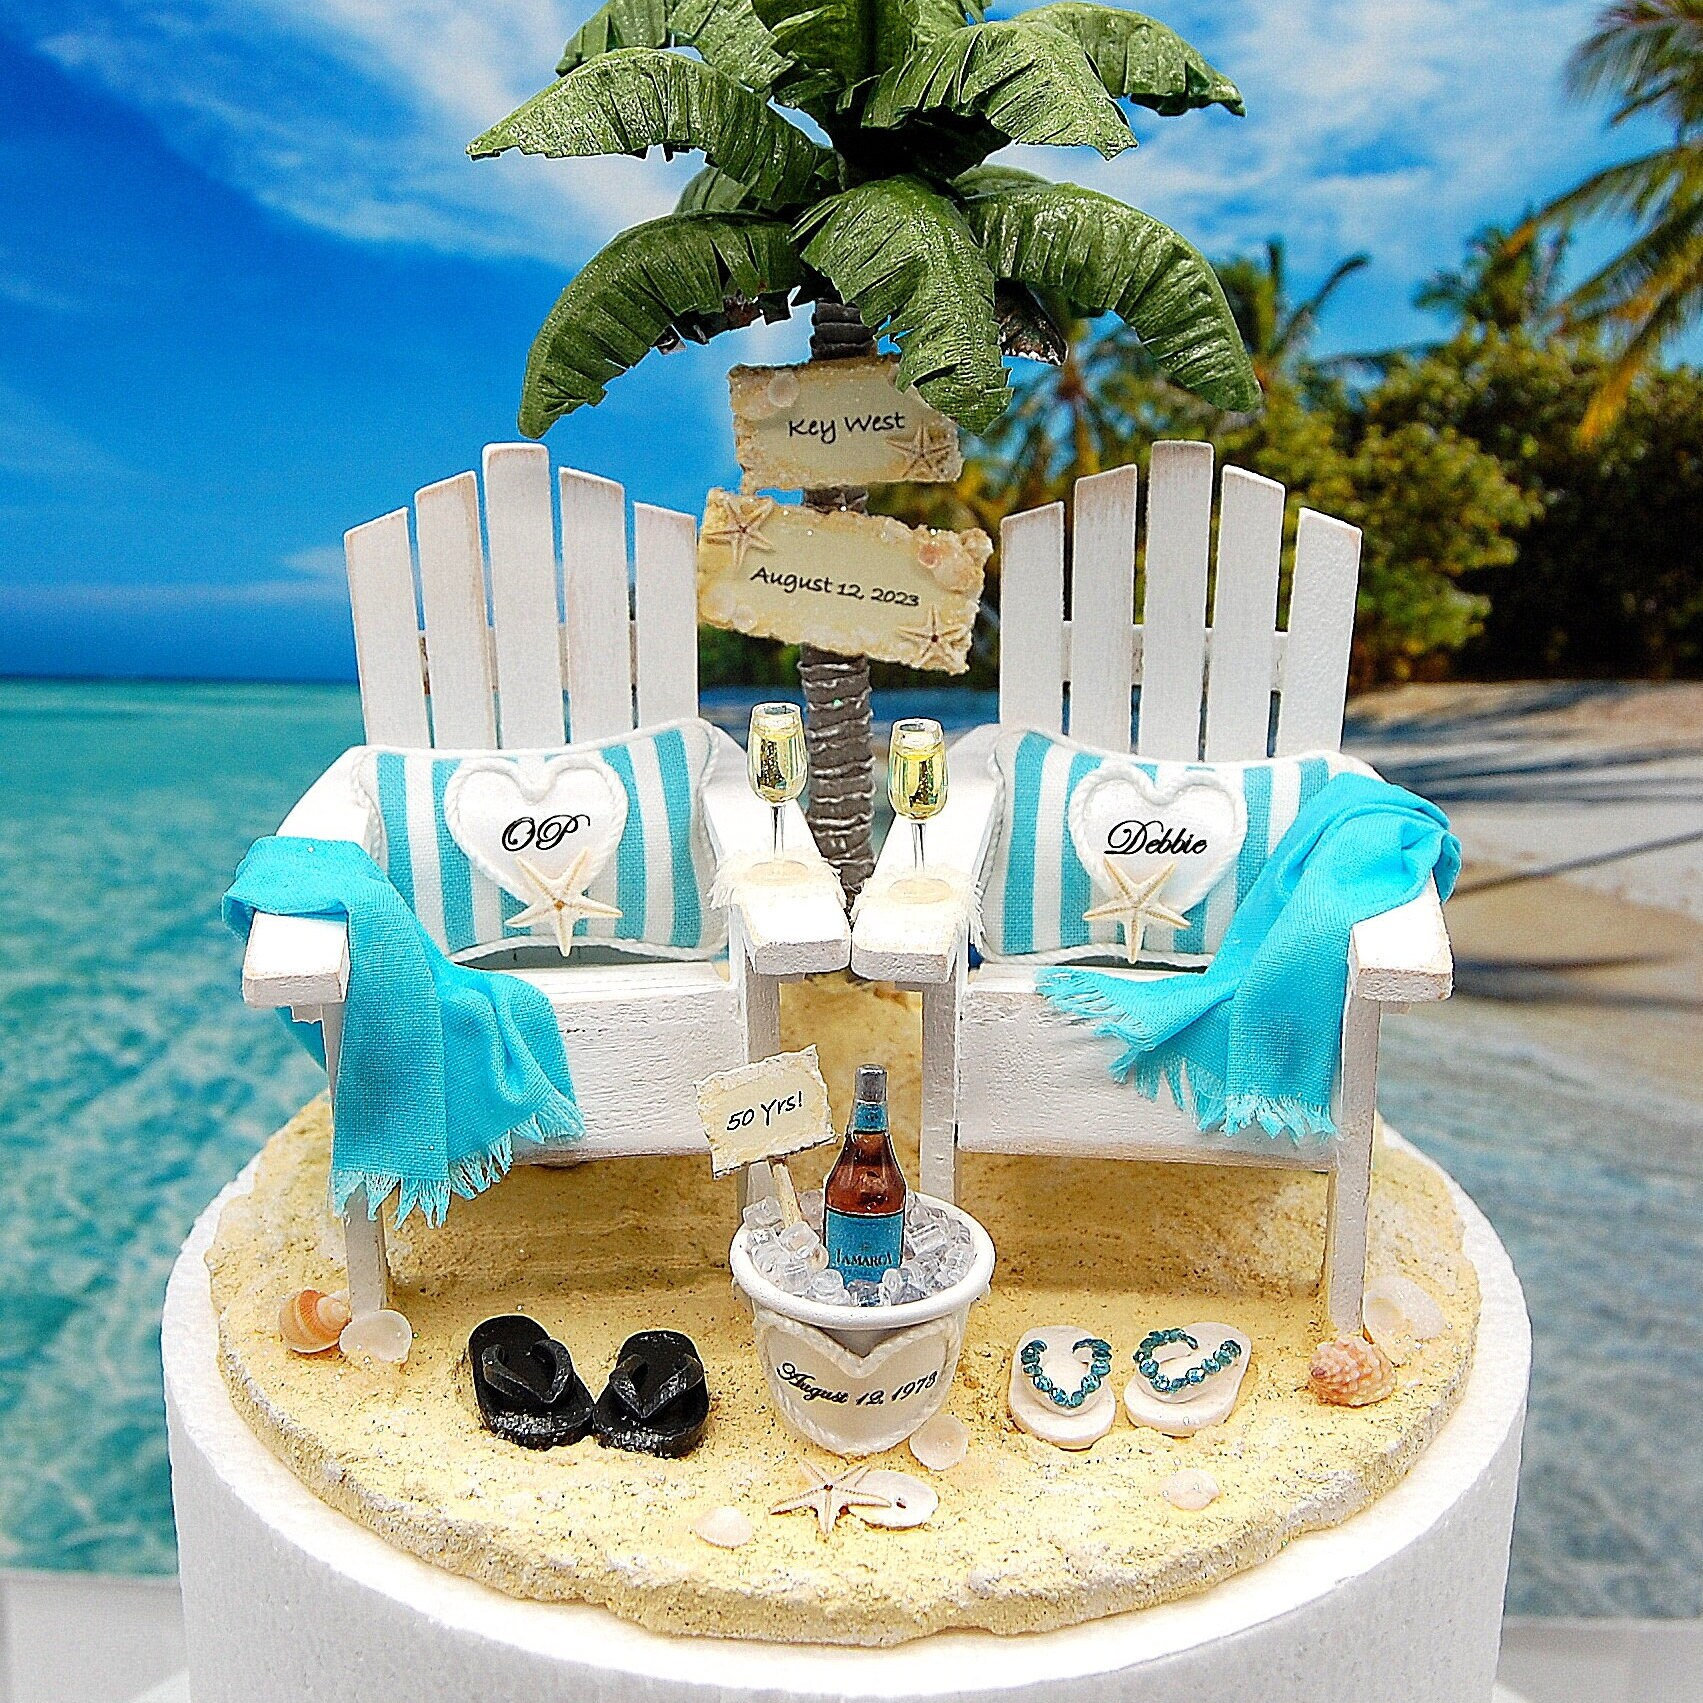 Innovative Beach Theme Cake for a Summer Party in New Zealand